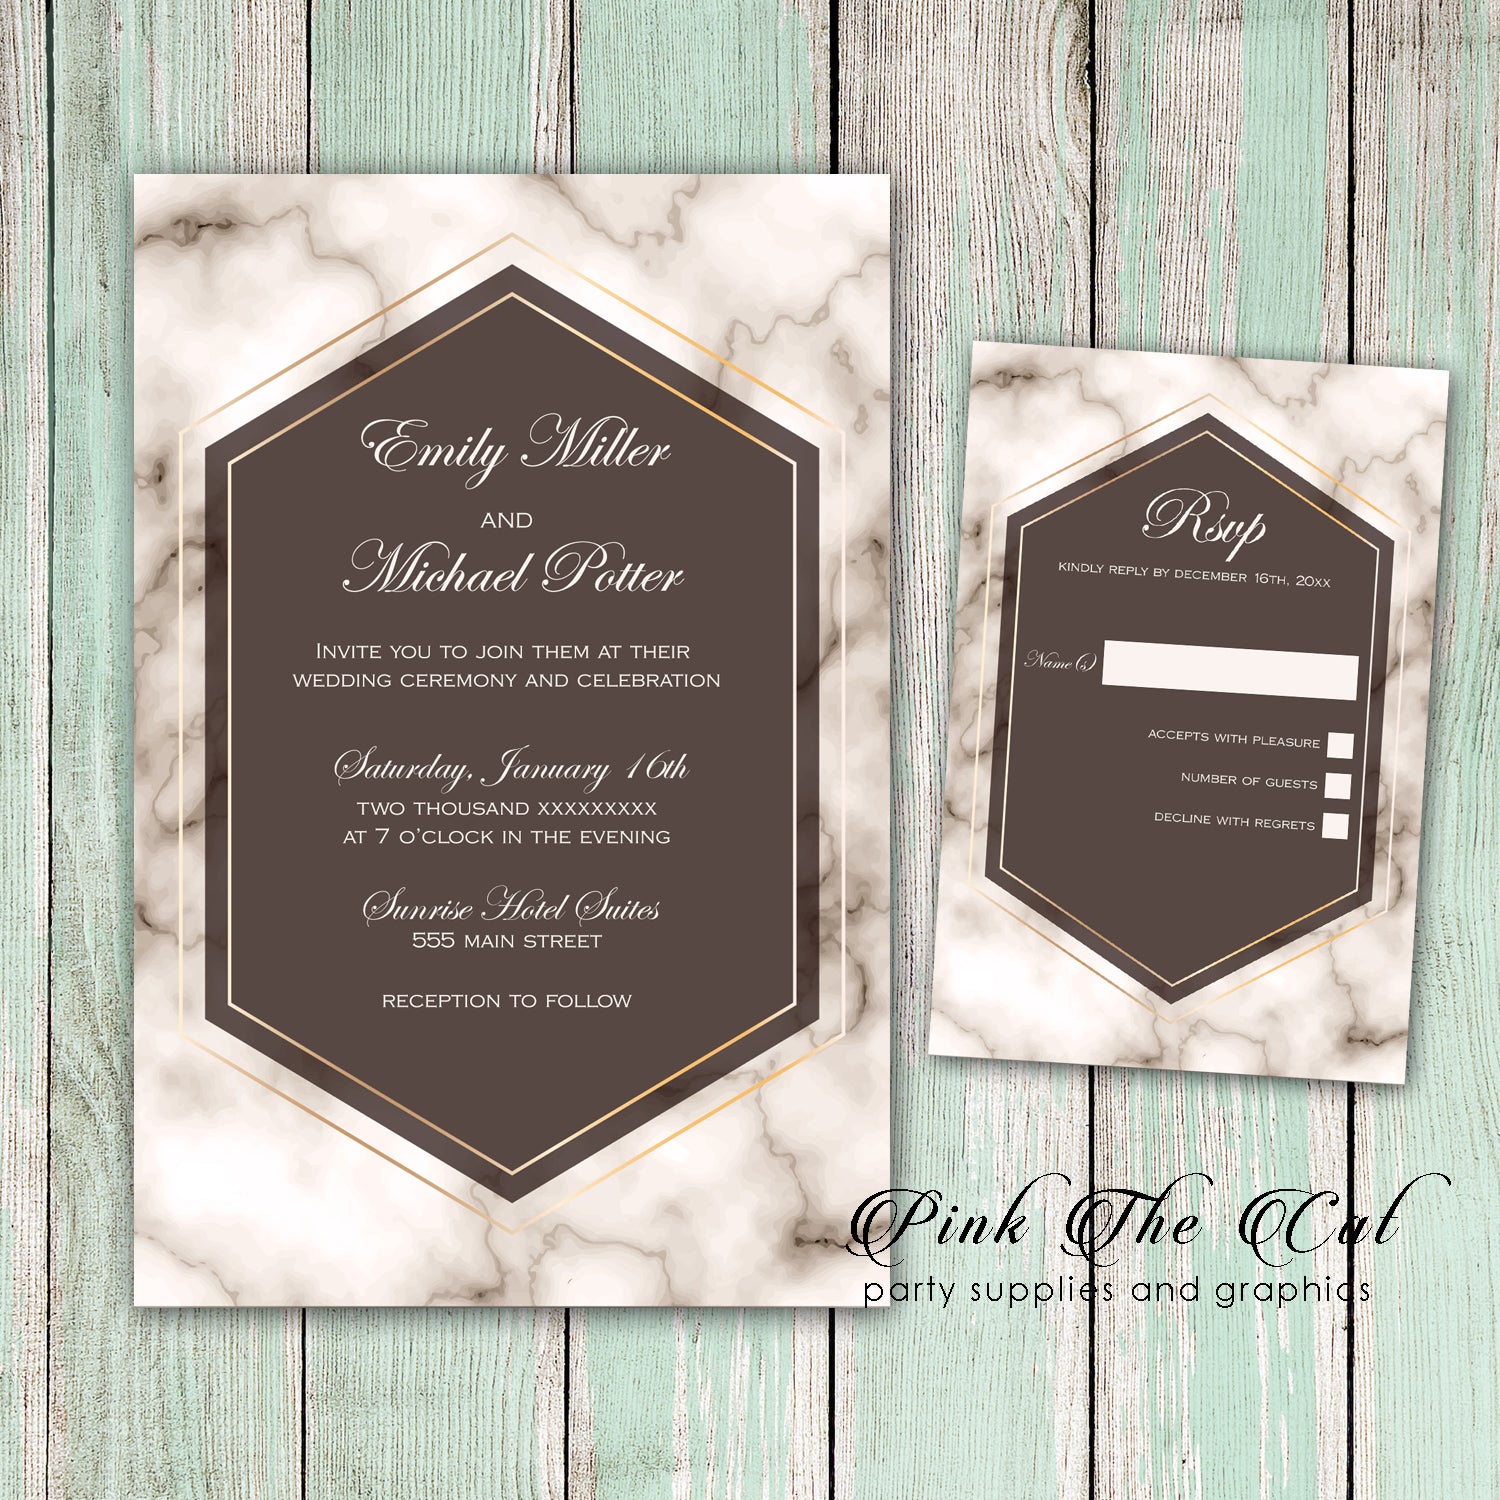 100 Wedding Invitations & RSVP Cards Marble Brown